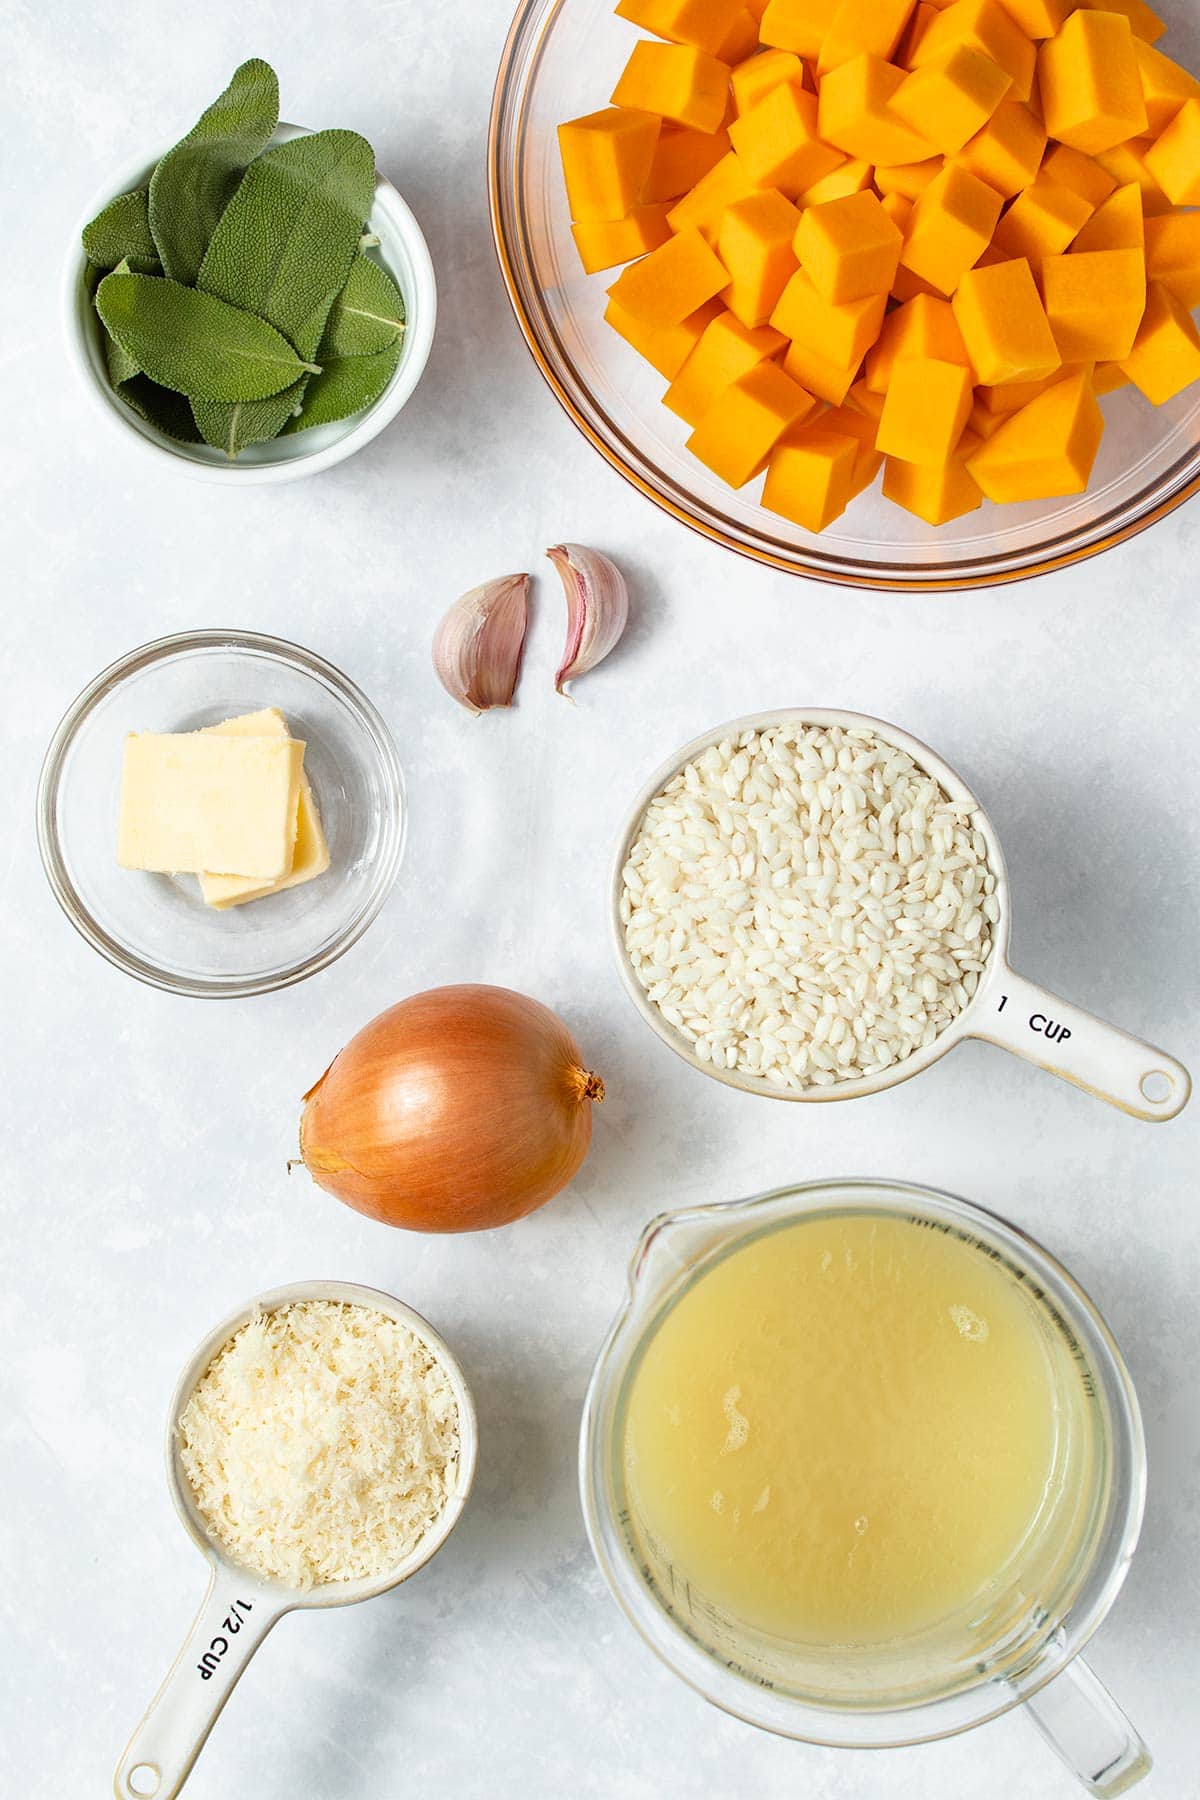 Ingredients for Instant Pot Butternut Squash Risotto viewed from overhead.